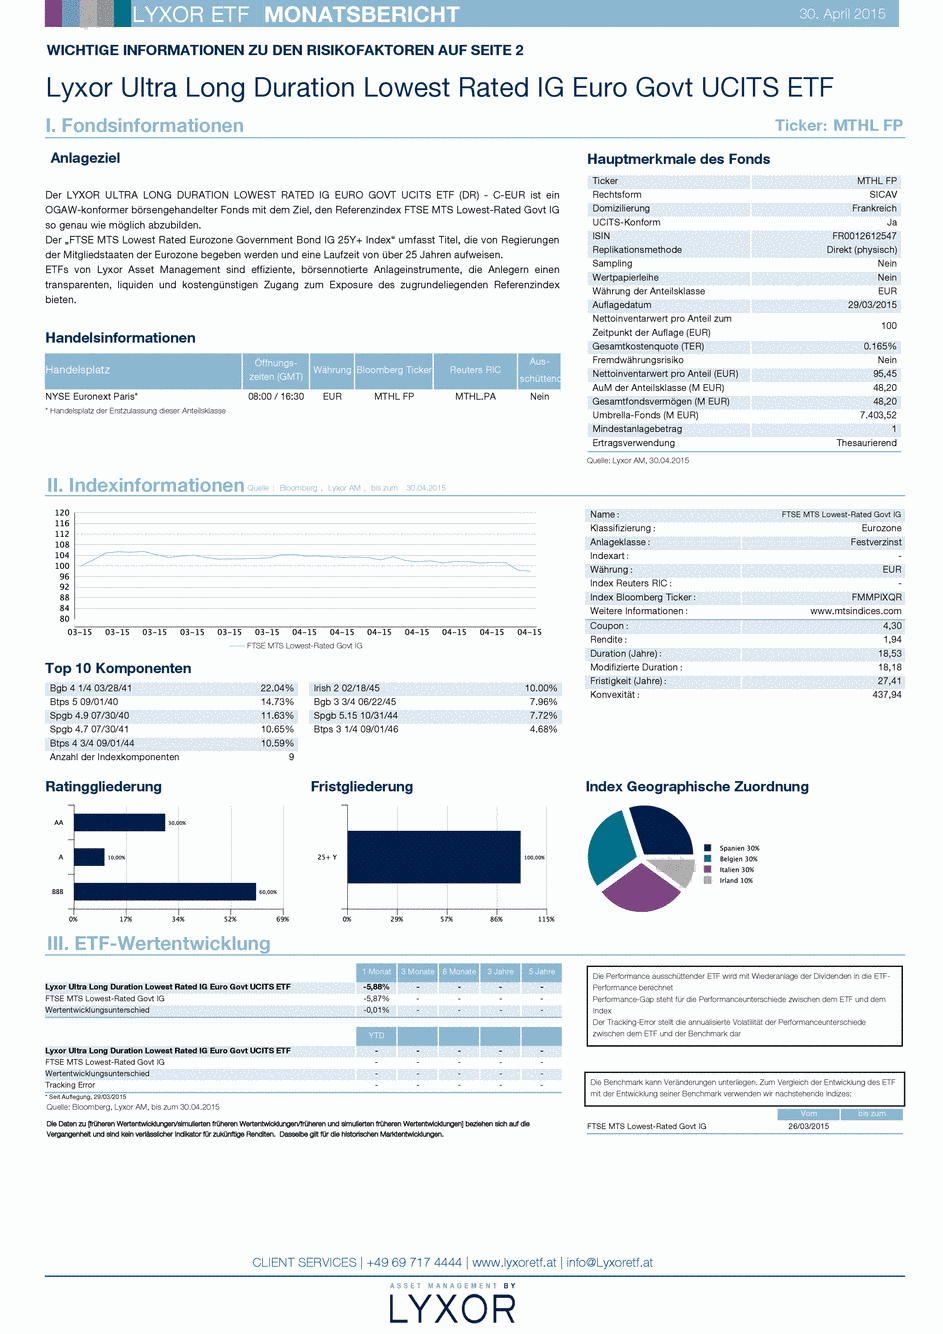 Reporting LYXOR ULTRA LONG DURATION LOWEST RATED IG EURO GOVT UCITS ETF (DR) Part C-EUR - 30/04/2015 - Allemand